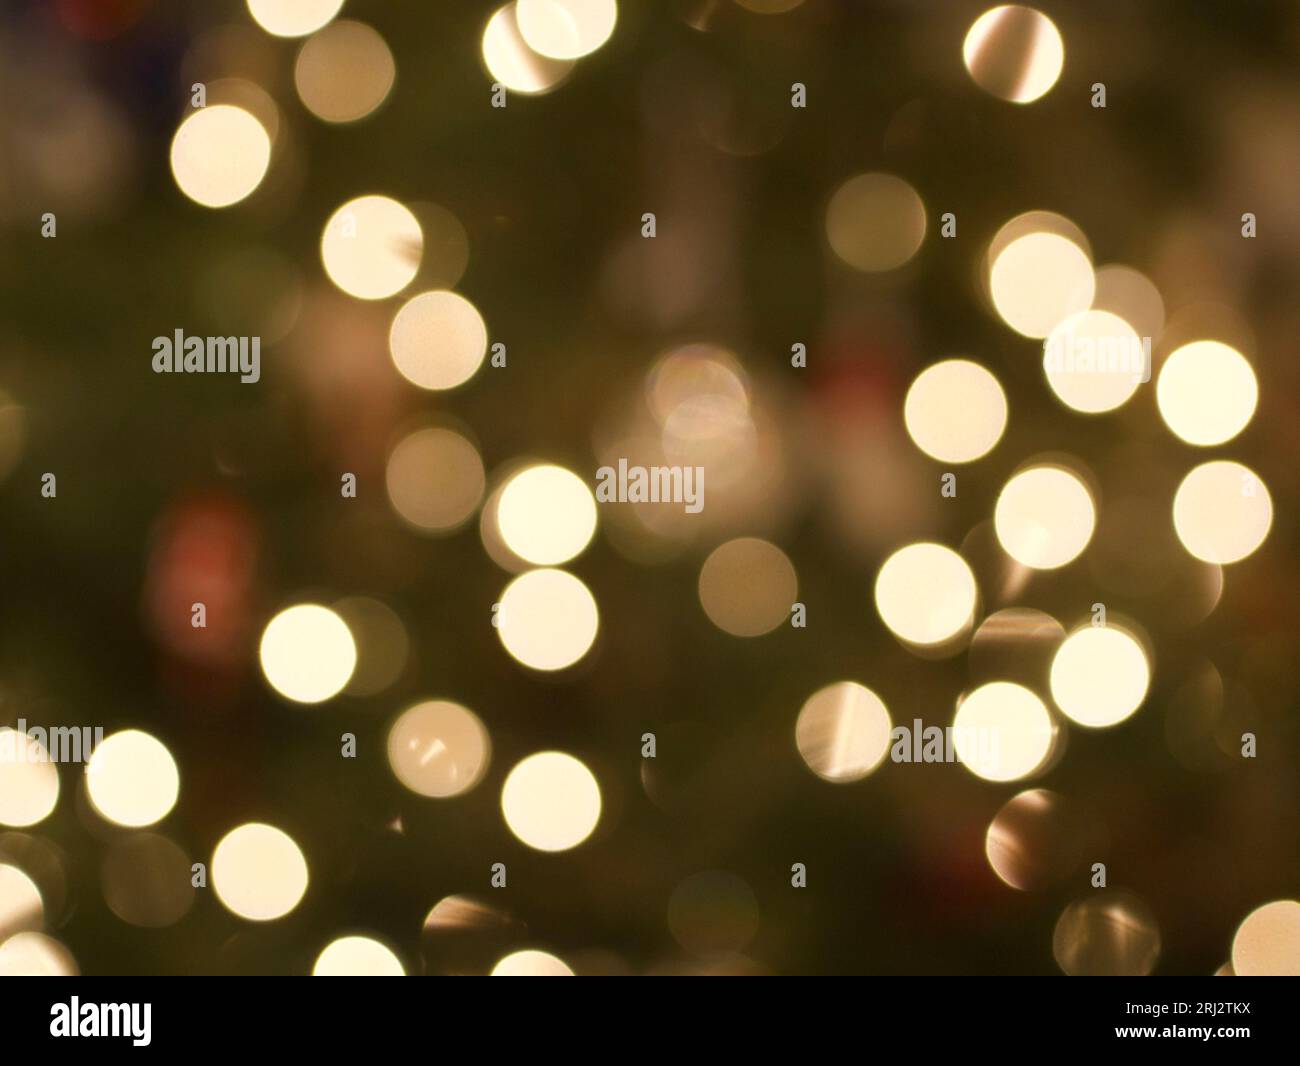 Blurred background Christmas holiday string lights Stock Photo